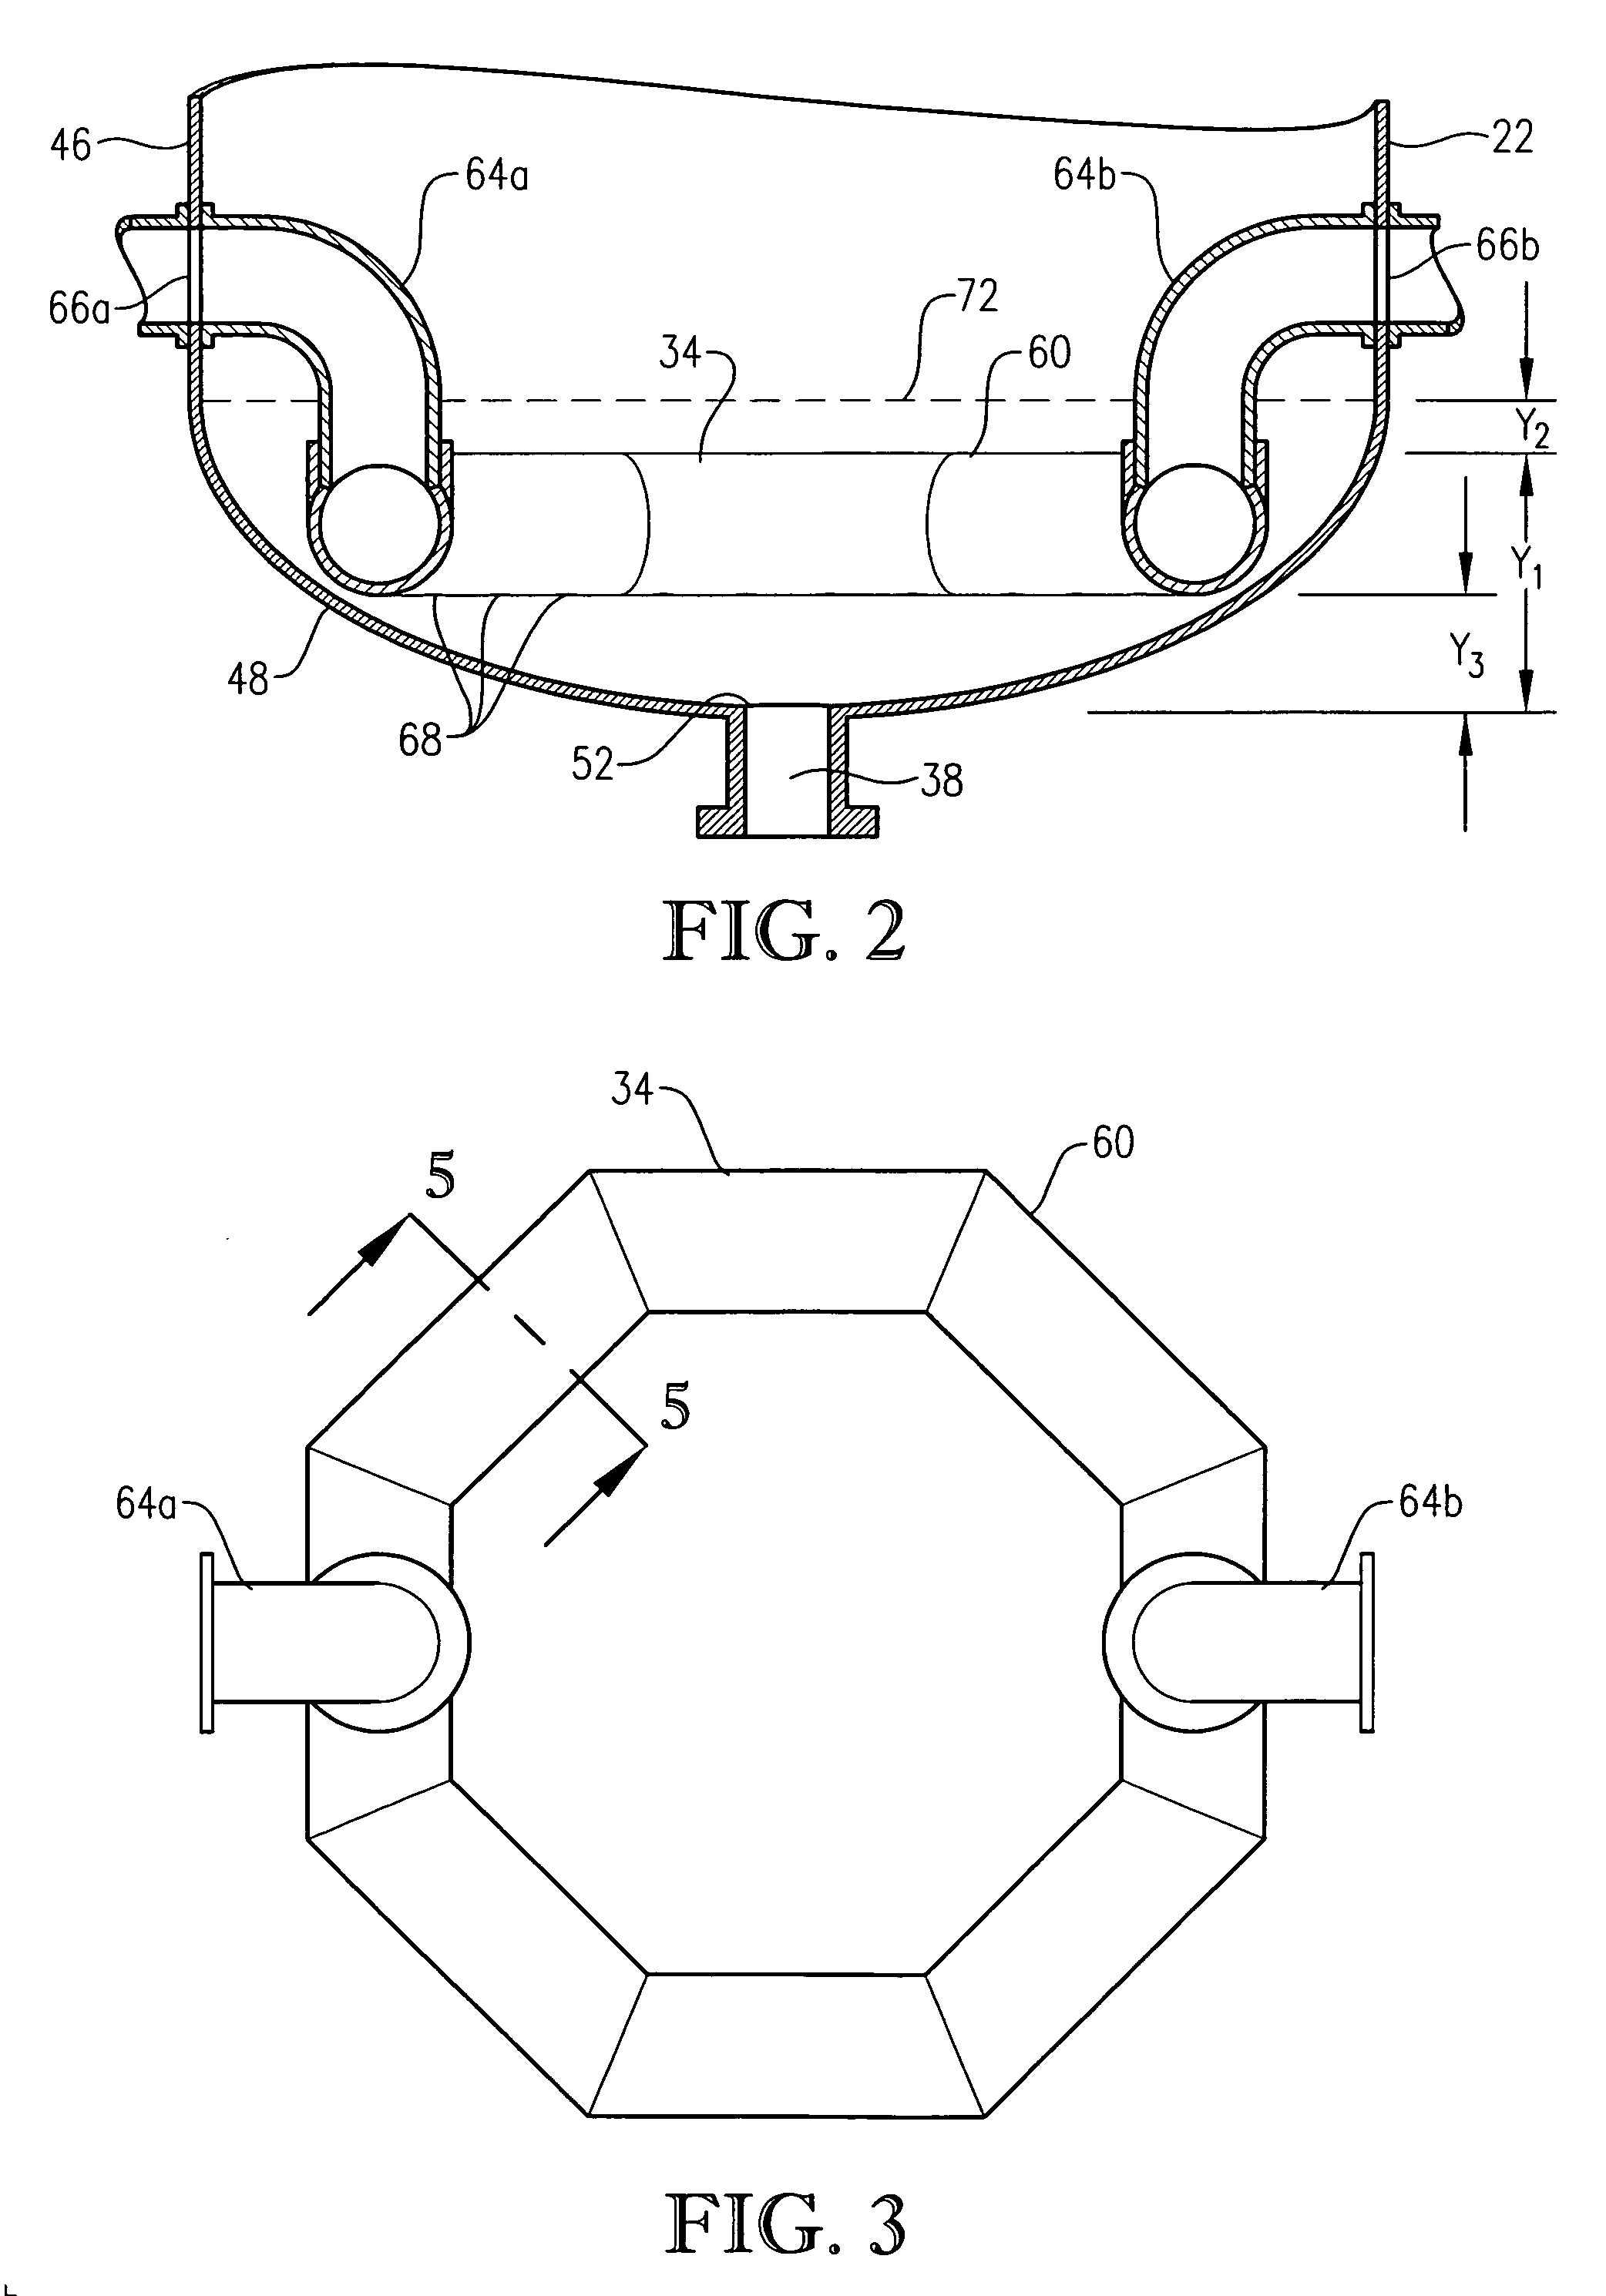 Oxidation system with internal secondary reactor